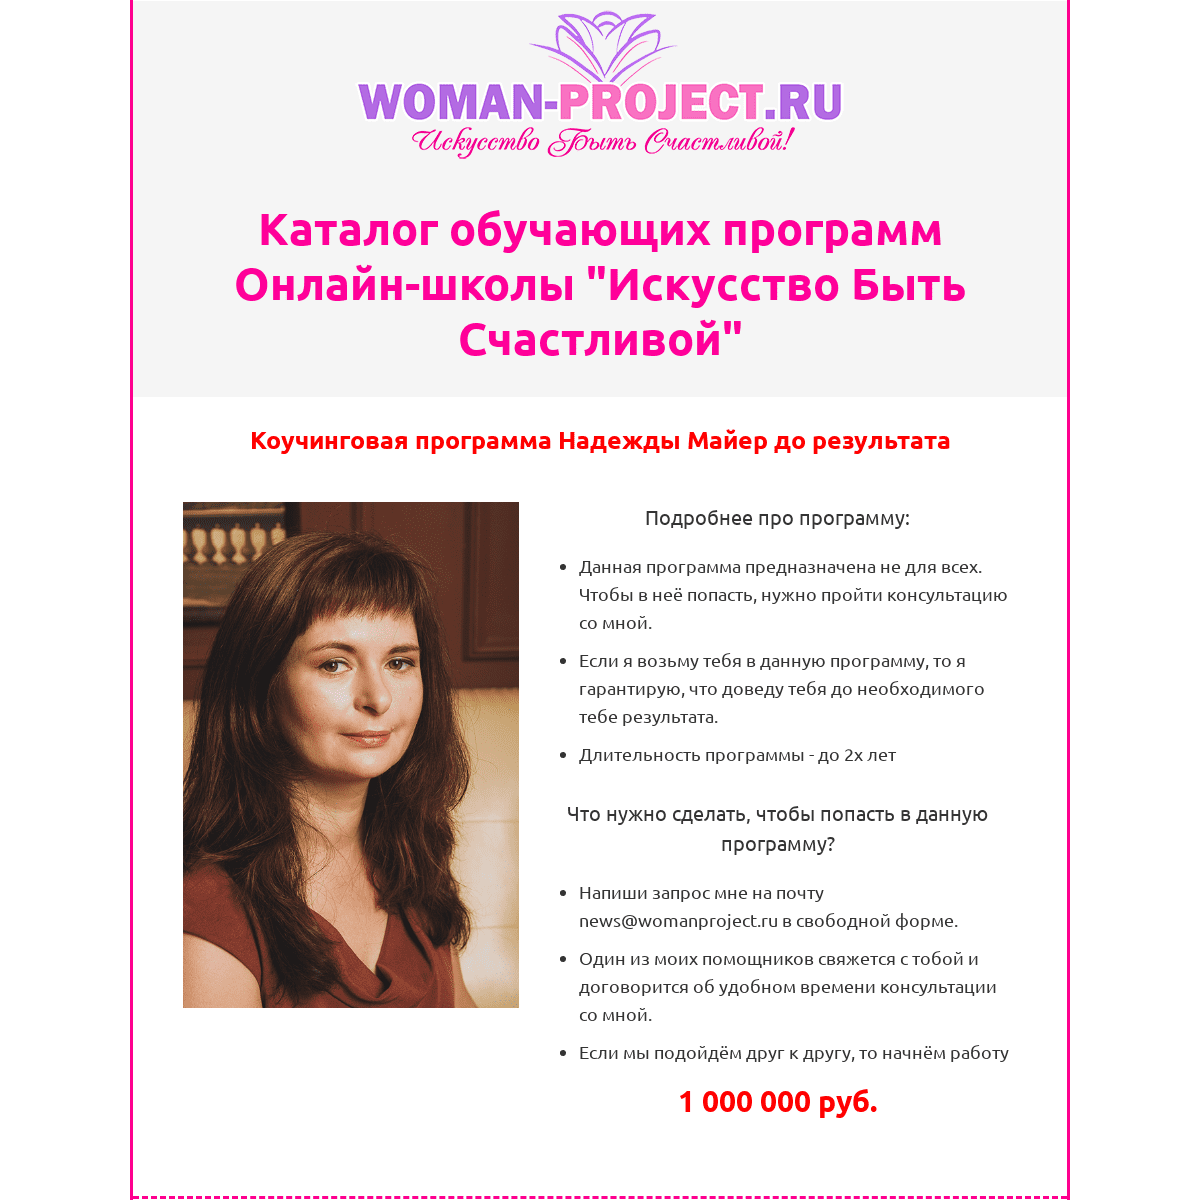 A complete backup of woman-project.ru